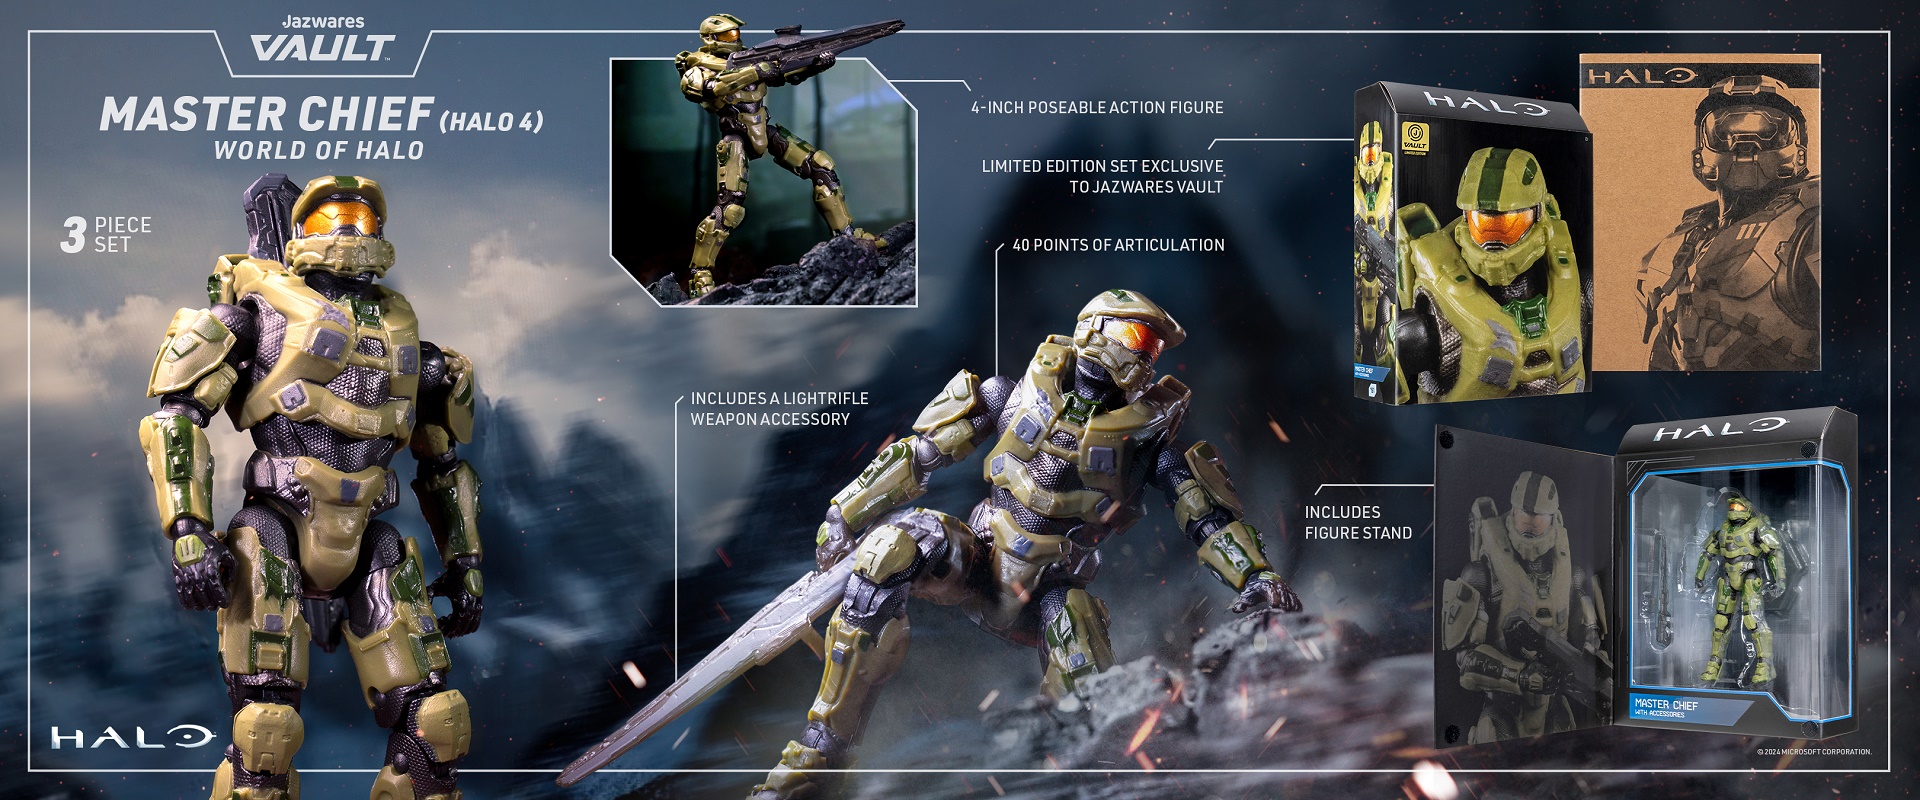 Halo Gear image of the Halo 4 Master Chief figure